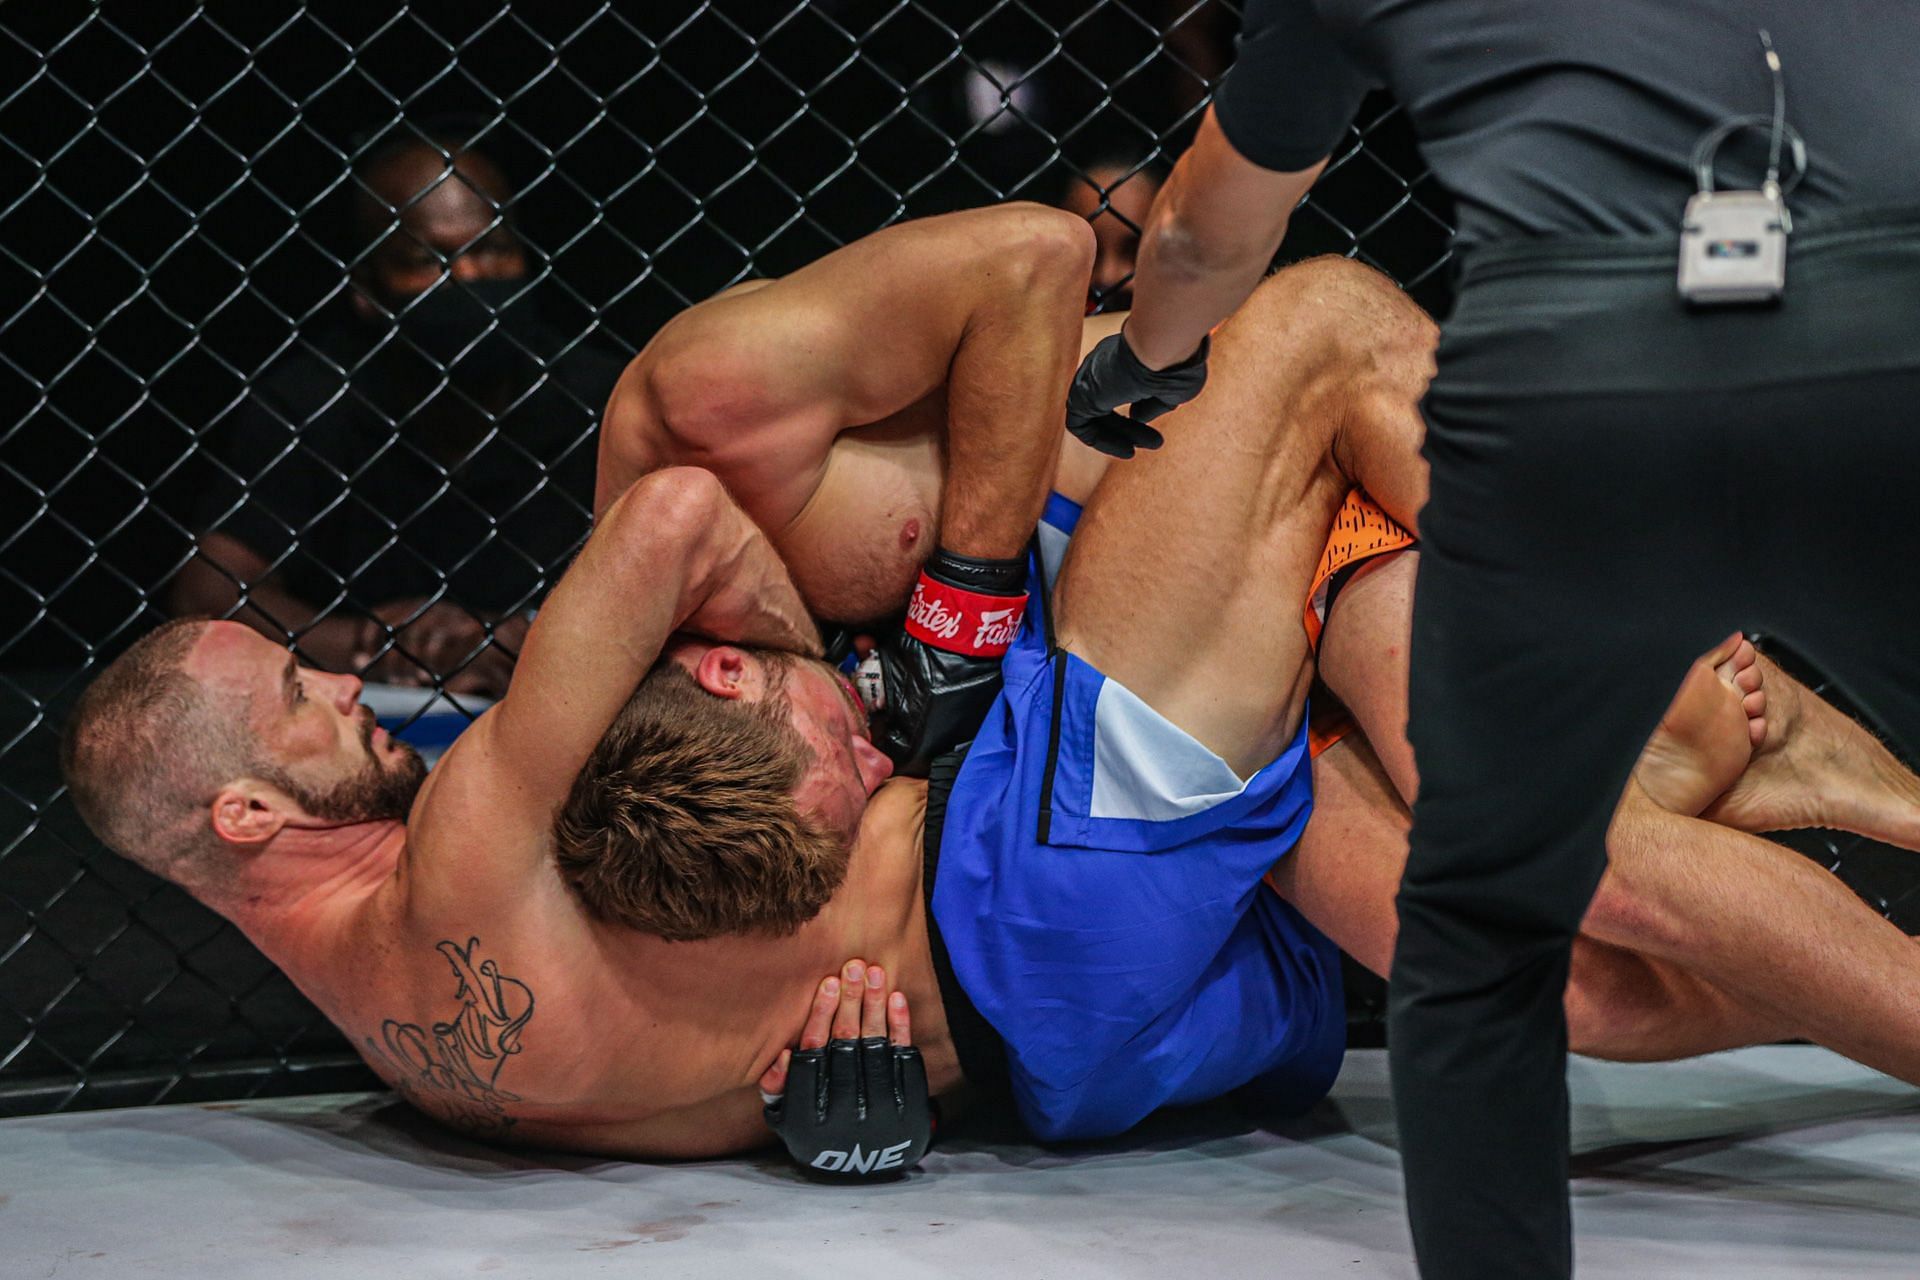 Vitaly Bigdash put Reinier de Ridder in a guillotine choke early in the fight. (Image courtesy of ONE)